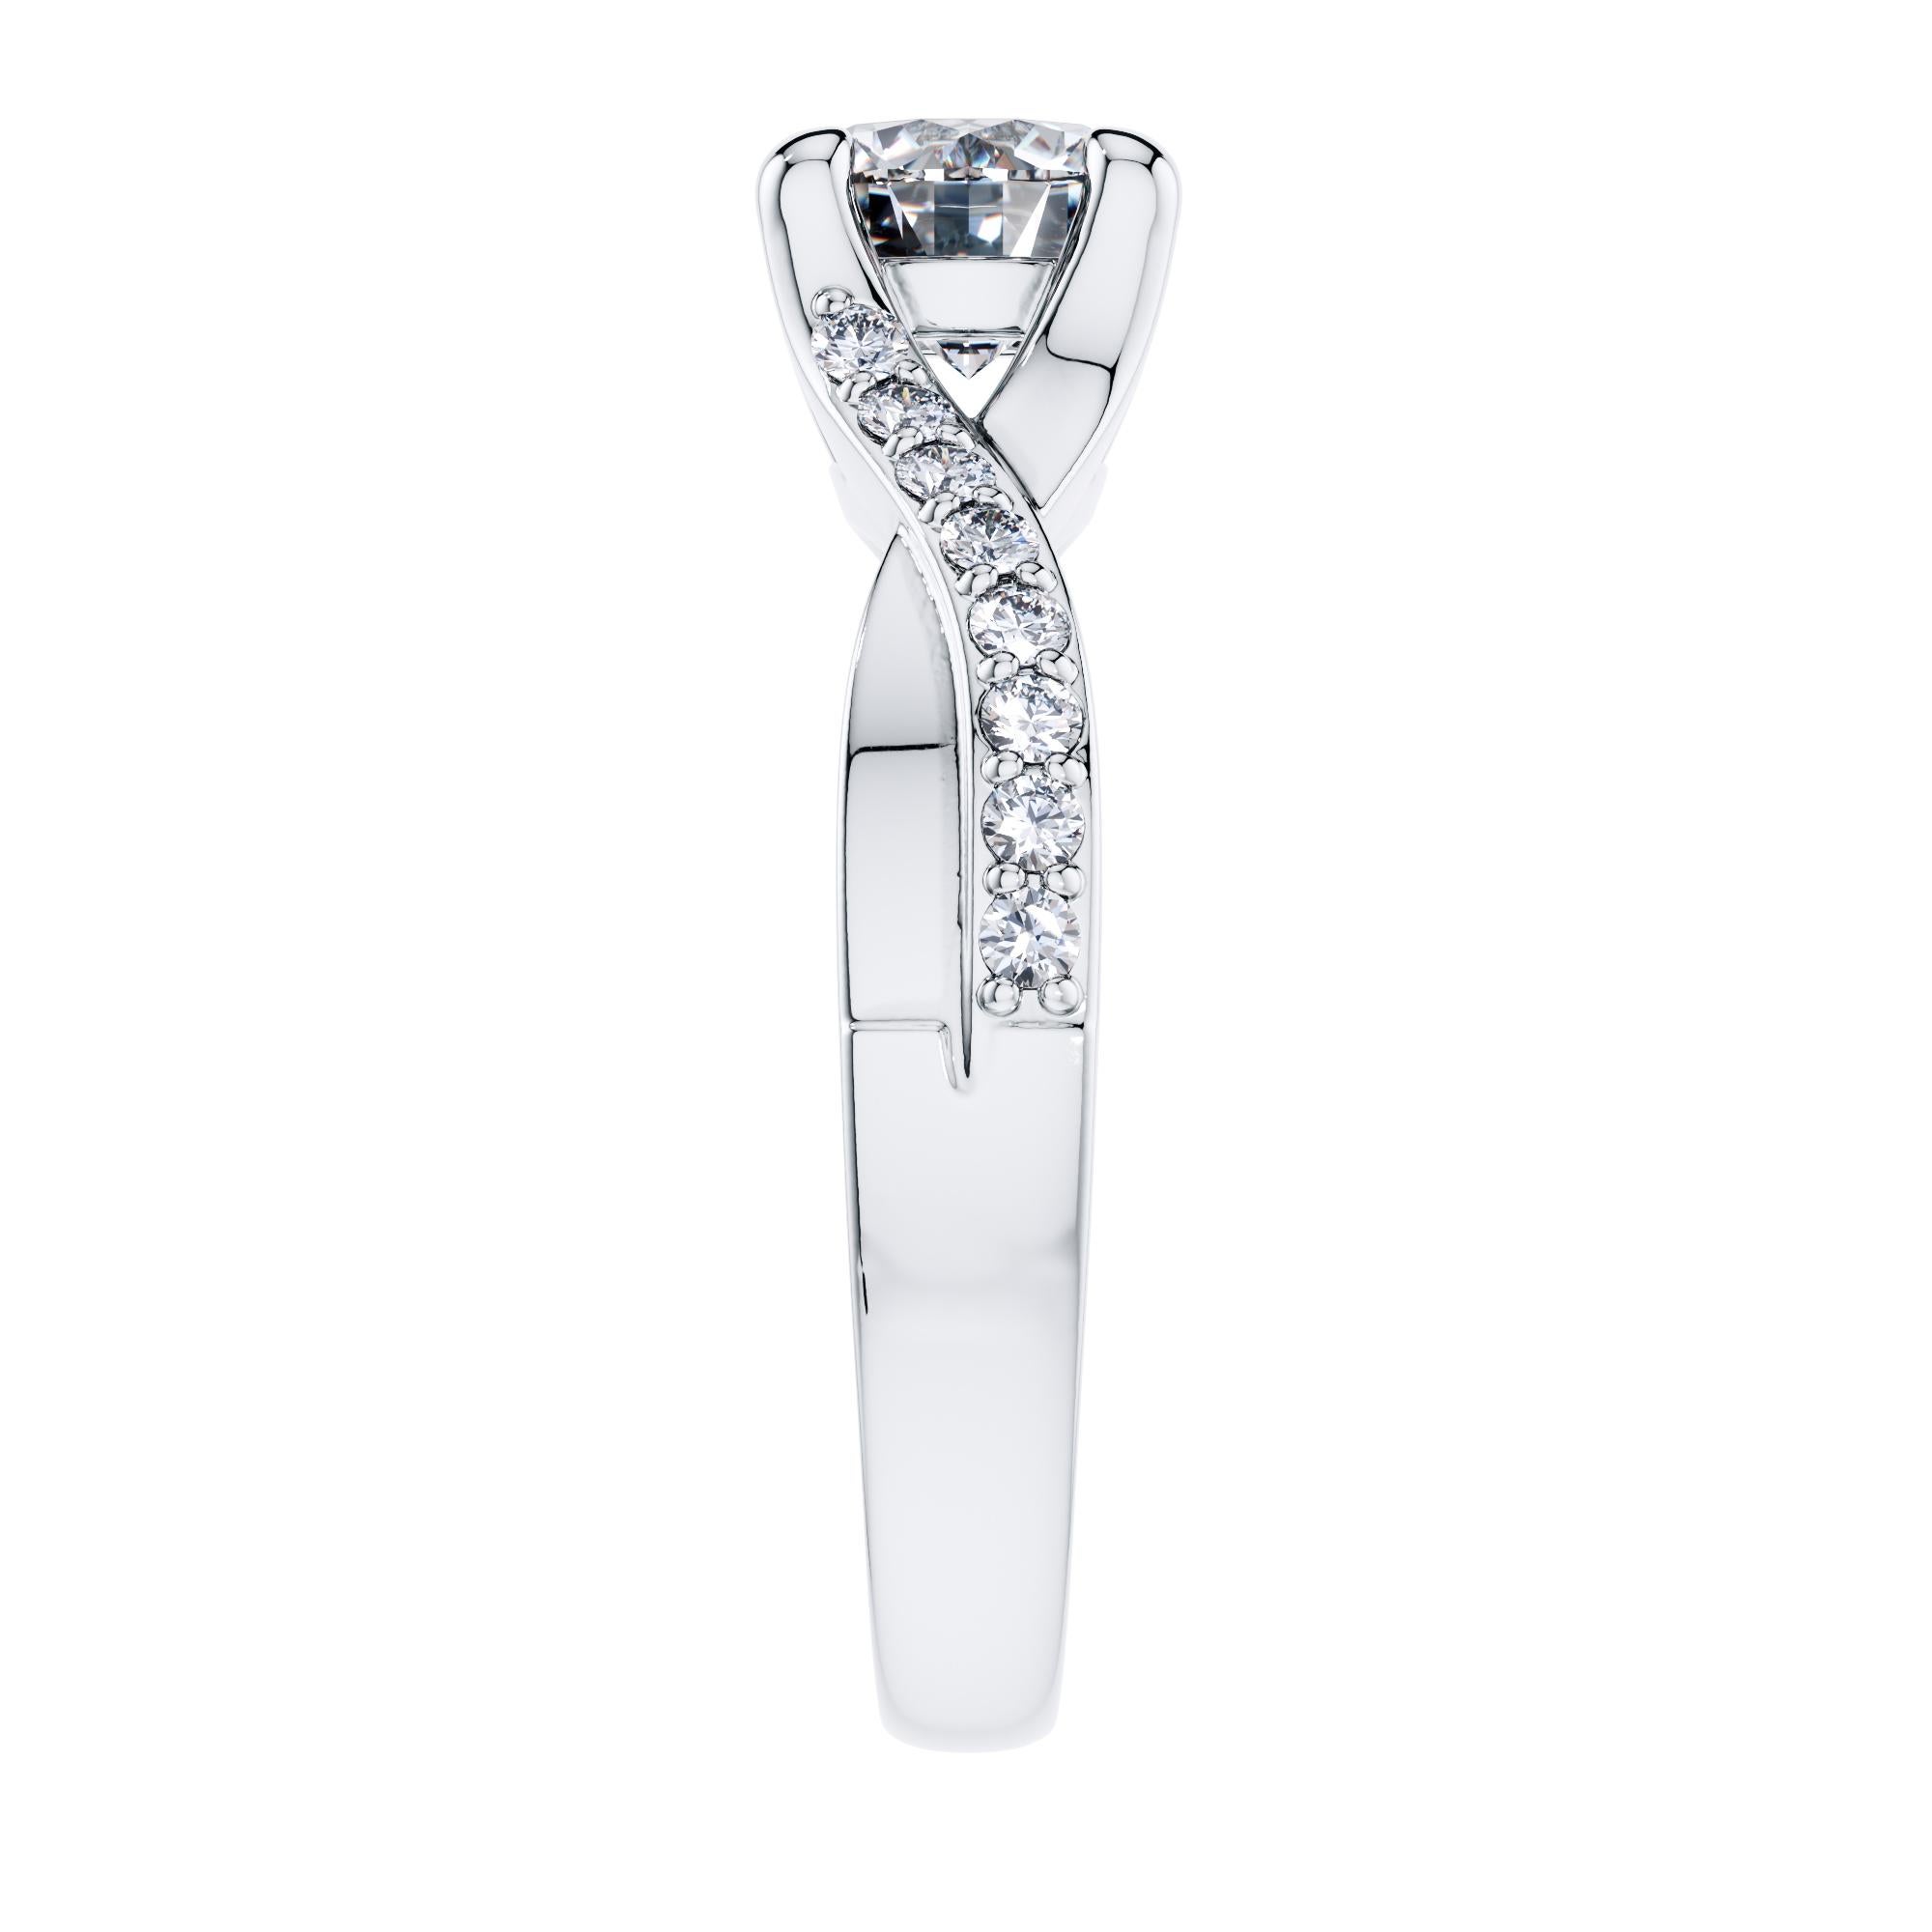 For a beautifully entwined journey together, this gleaming twisted vine modern classic engagement ring. Handmade in 18 Karat White Gold, with a total of 1.45 Carat White Diamonds. Set in an open gallery 4 prong mount with a split shank that has one